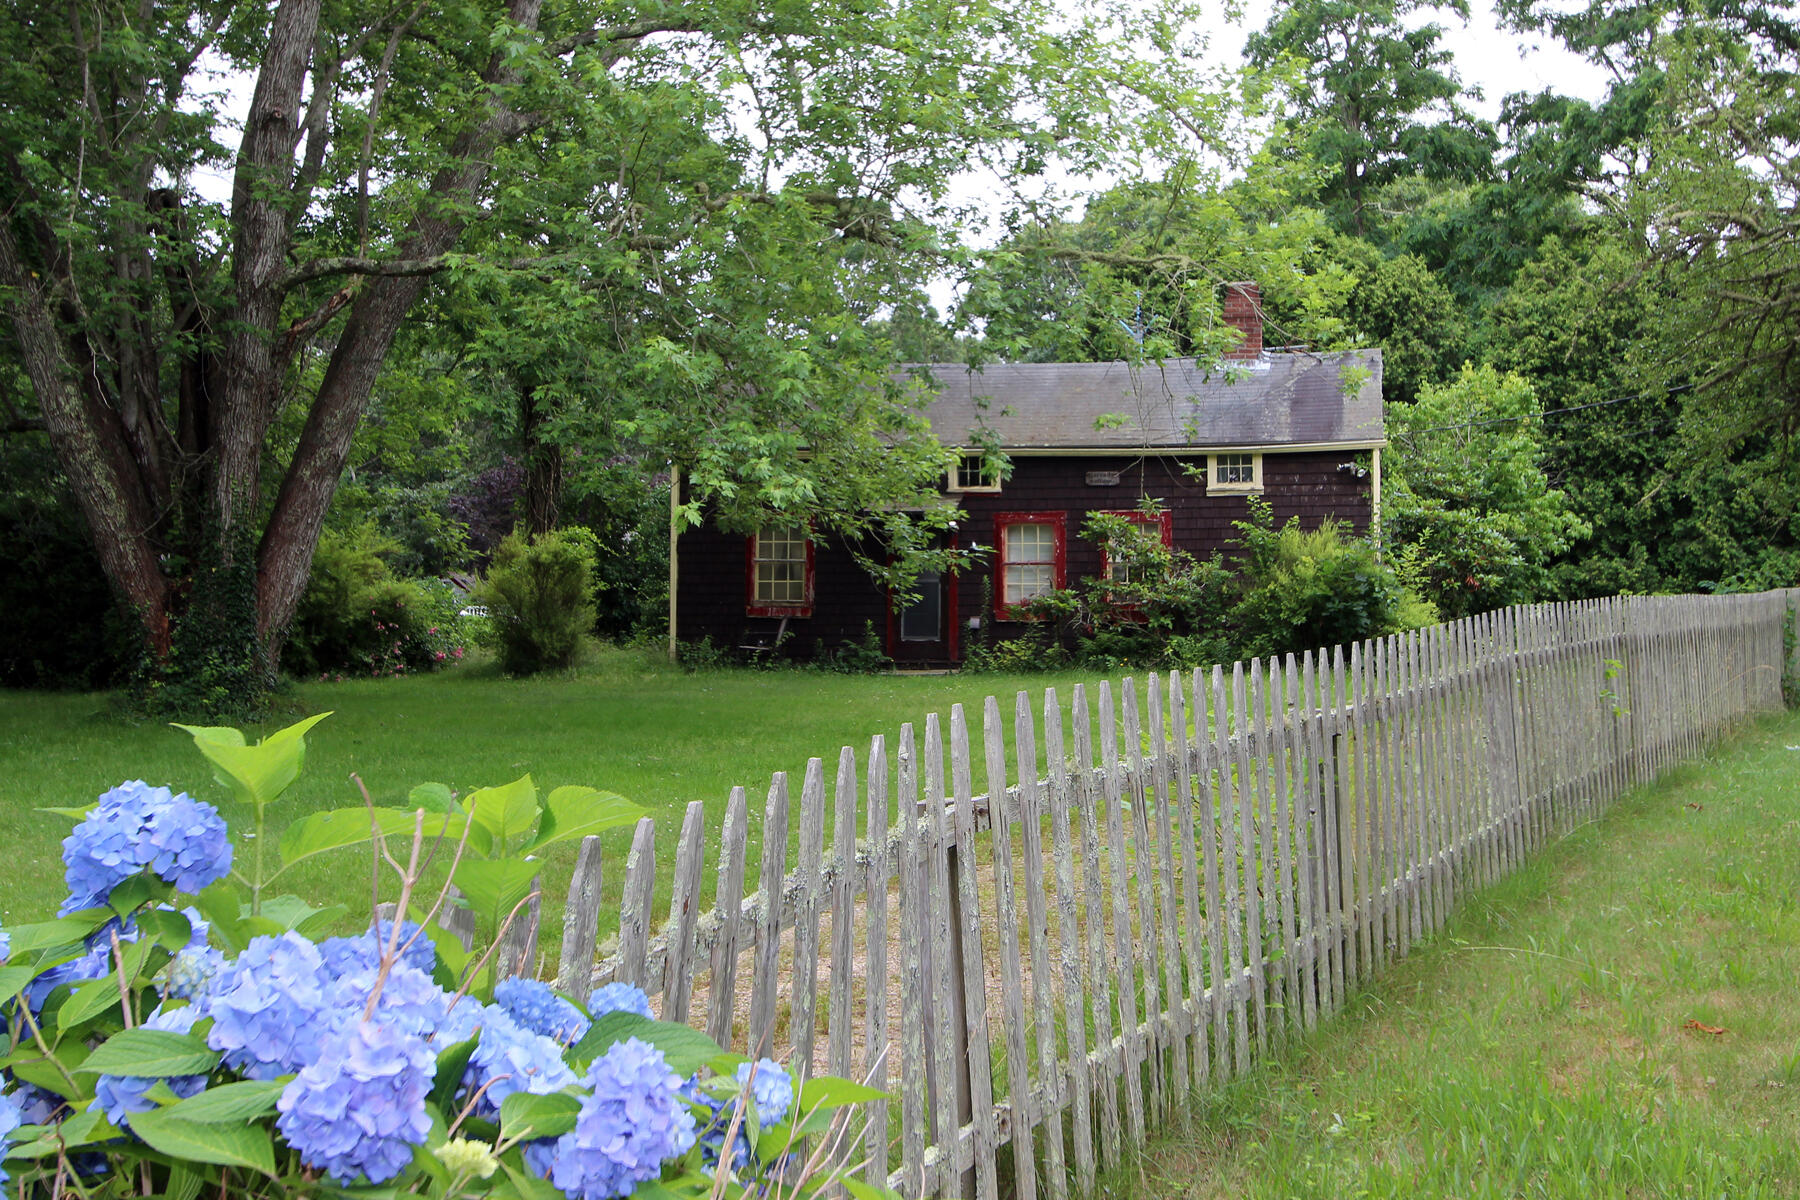 a view of a house with a yard and garden